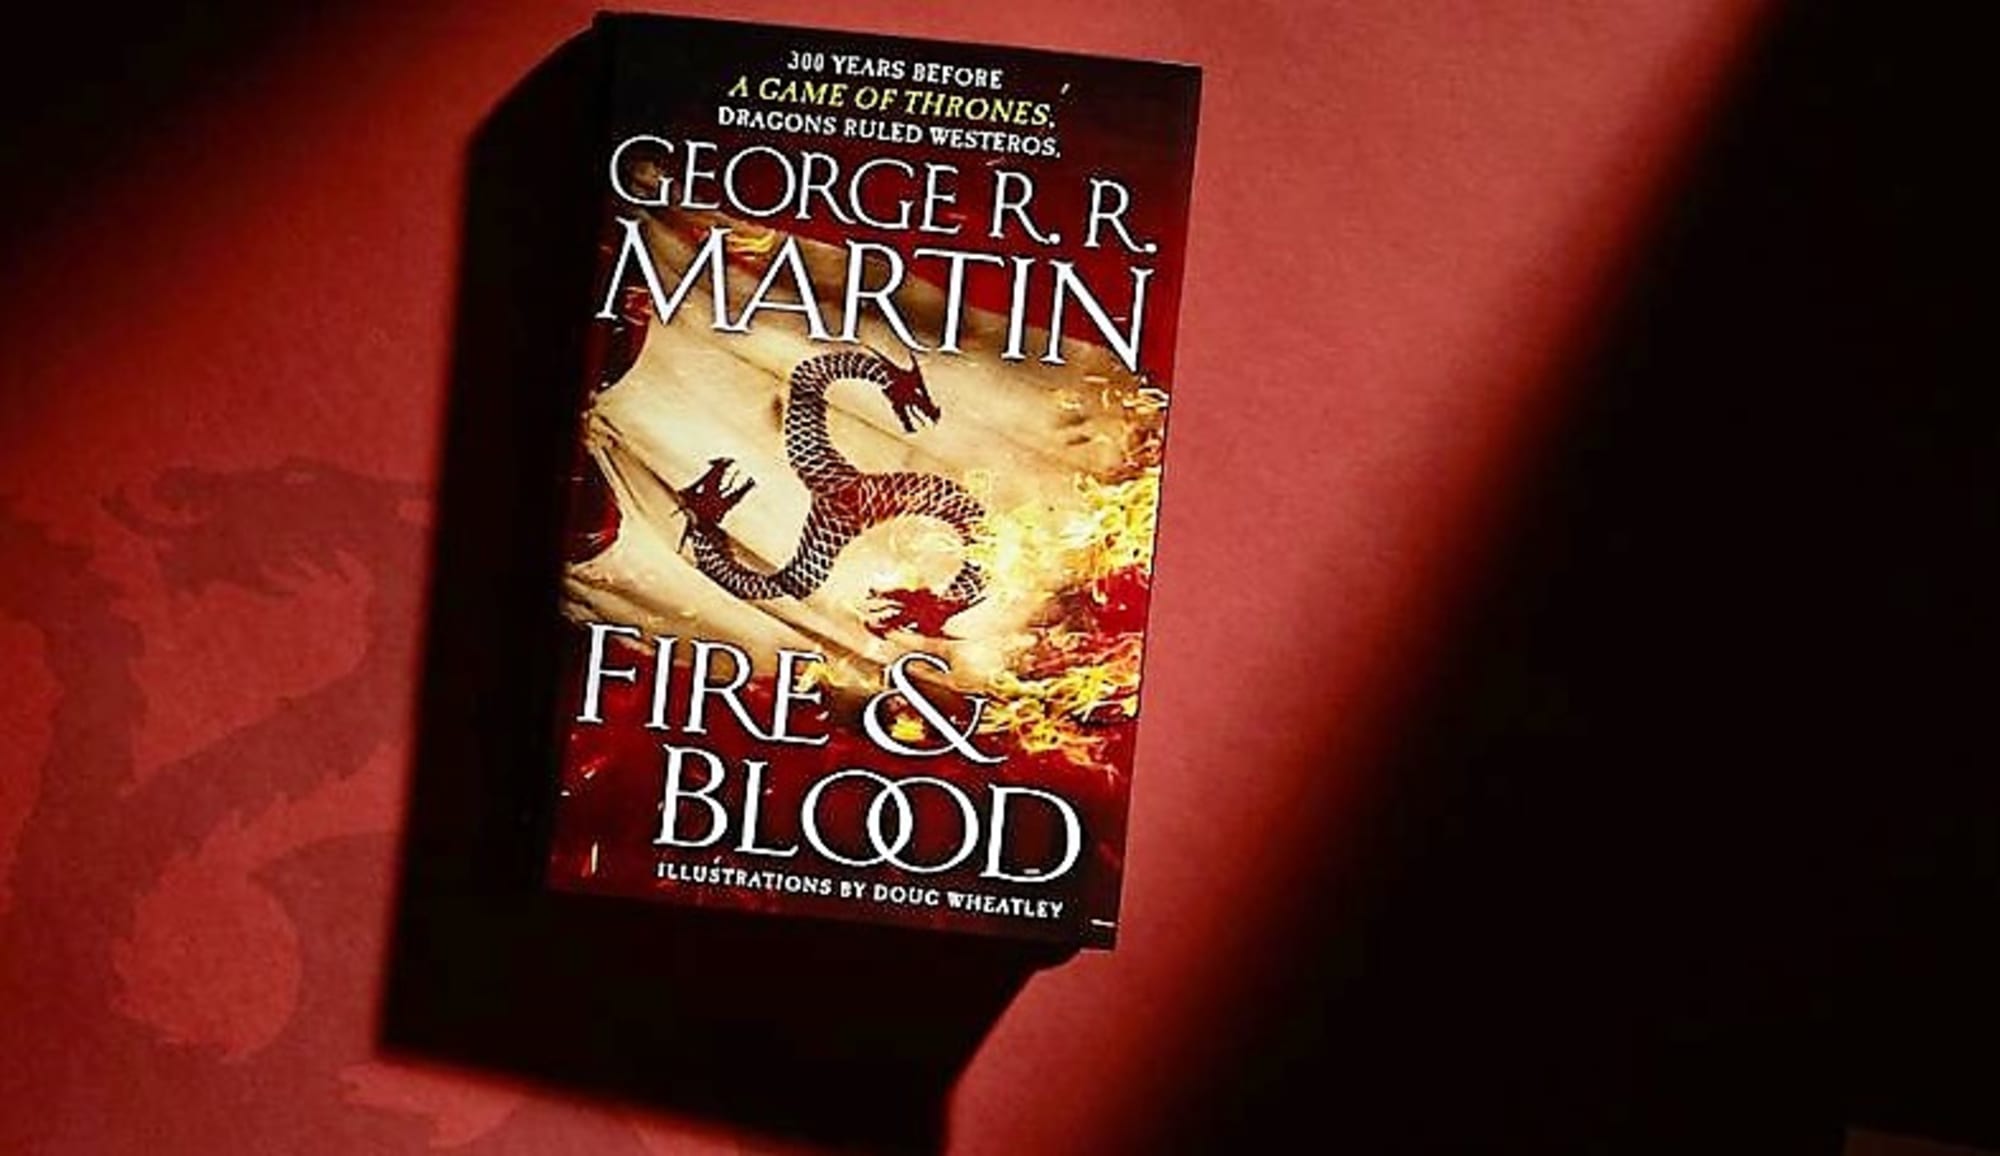 Fire & Blood now out in paperback